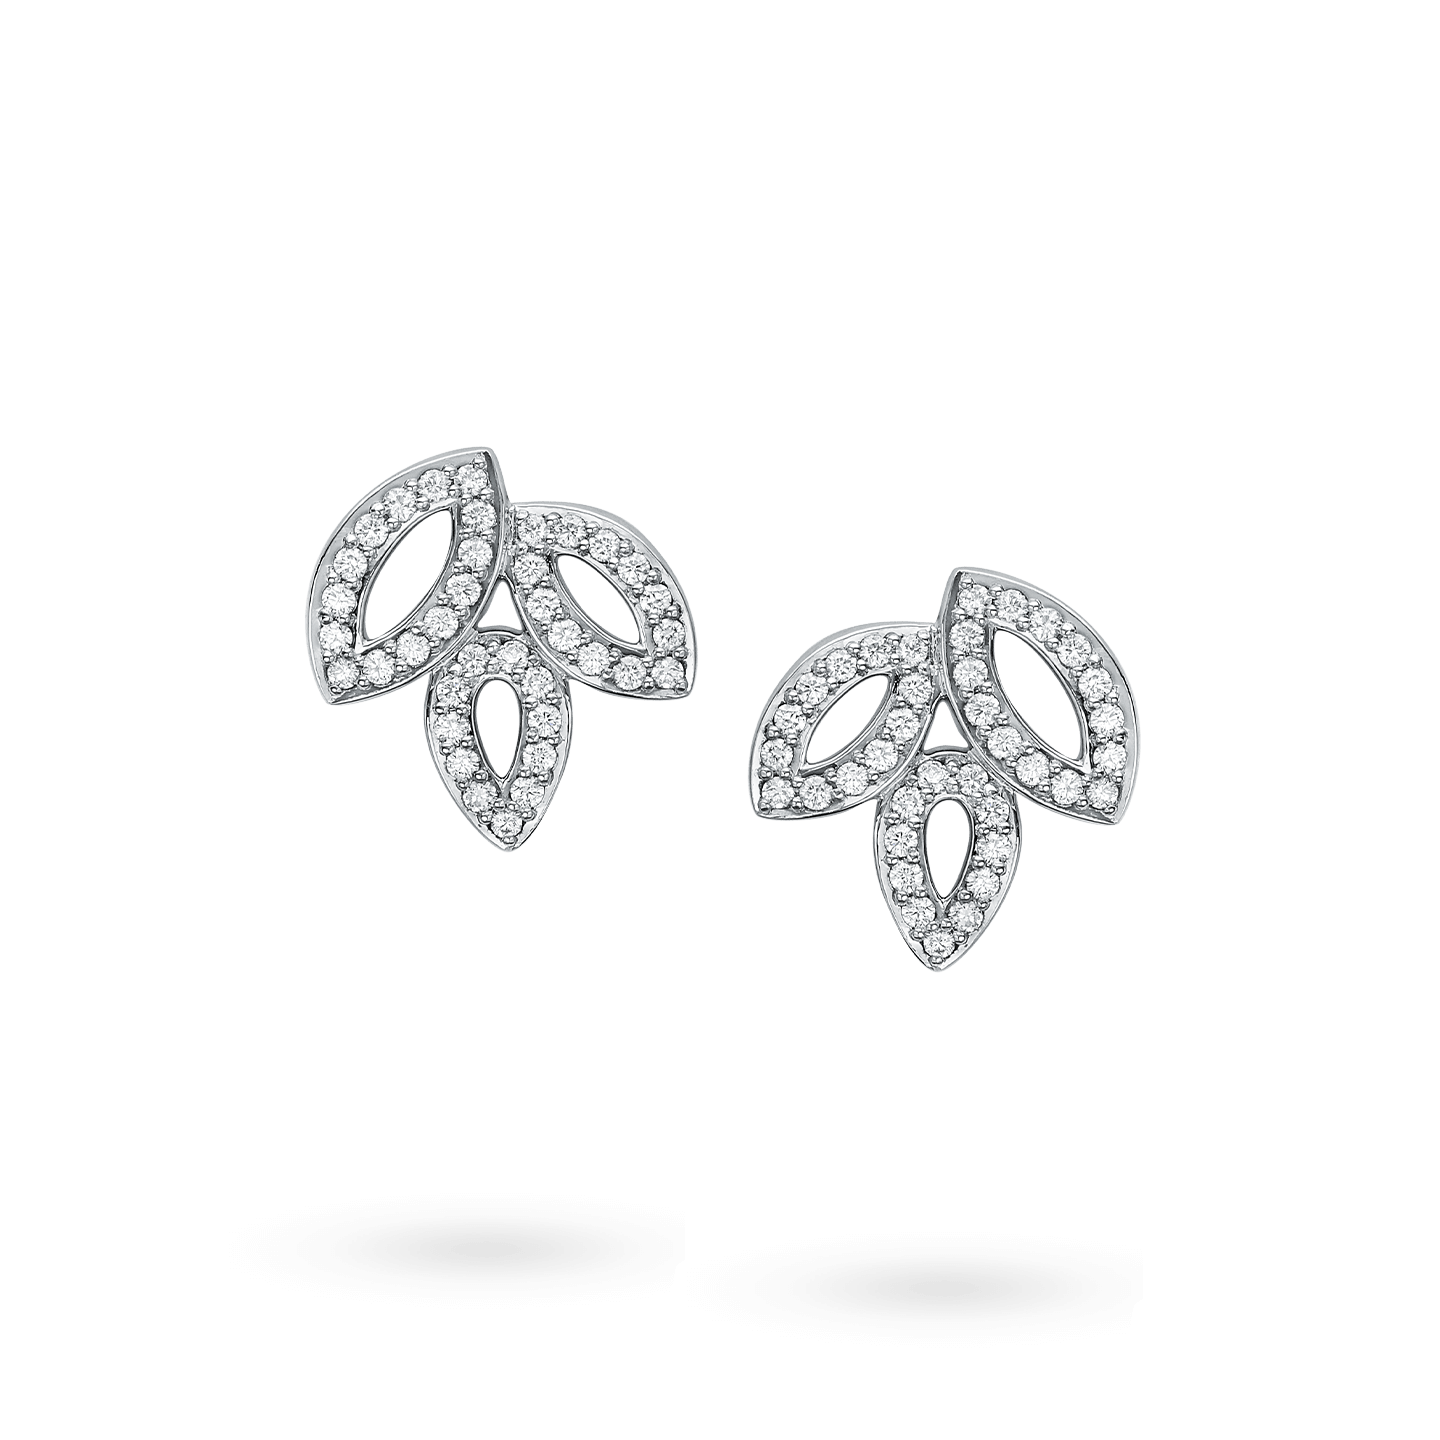 Lily Cluster Small Diamond Earrings in Platinum, Product Image 1